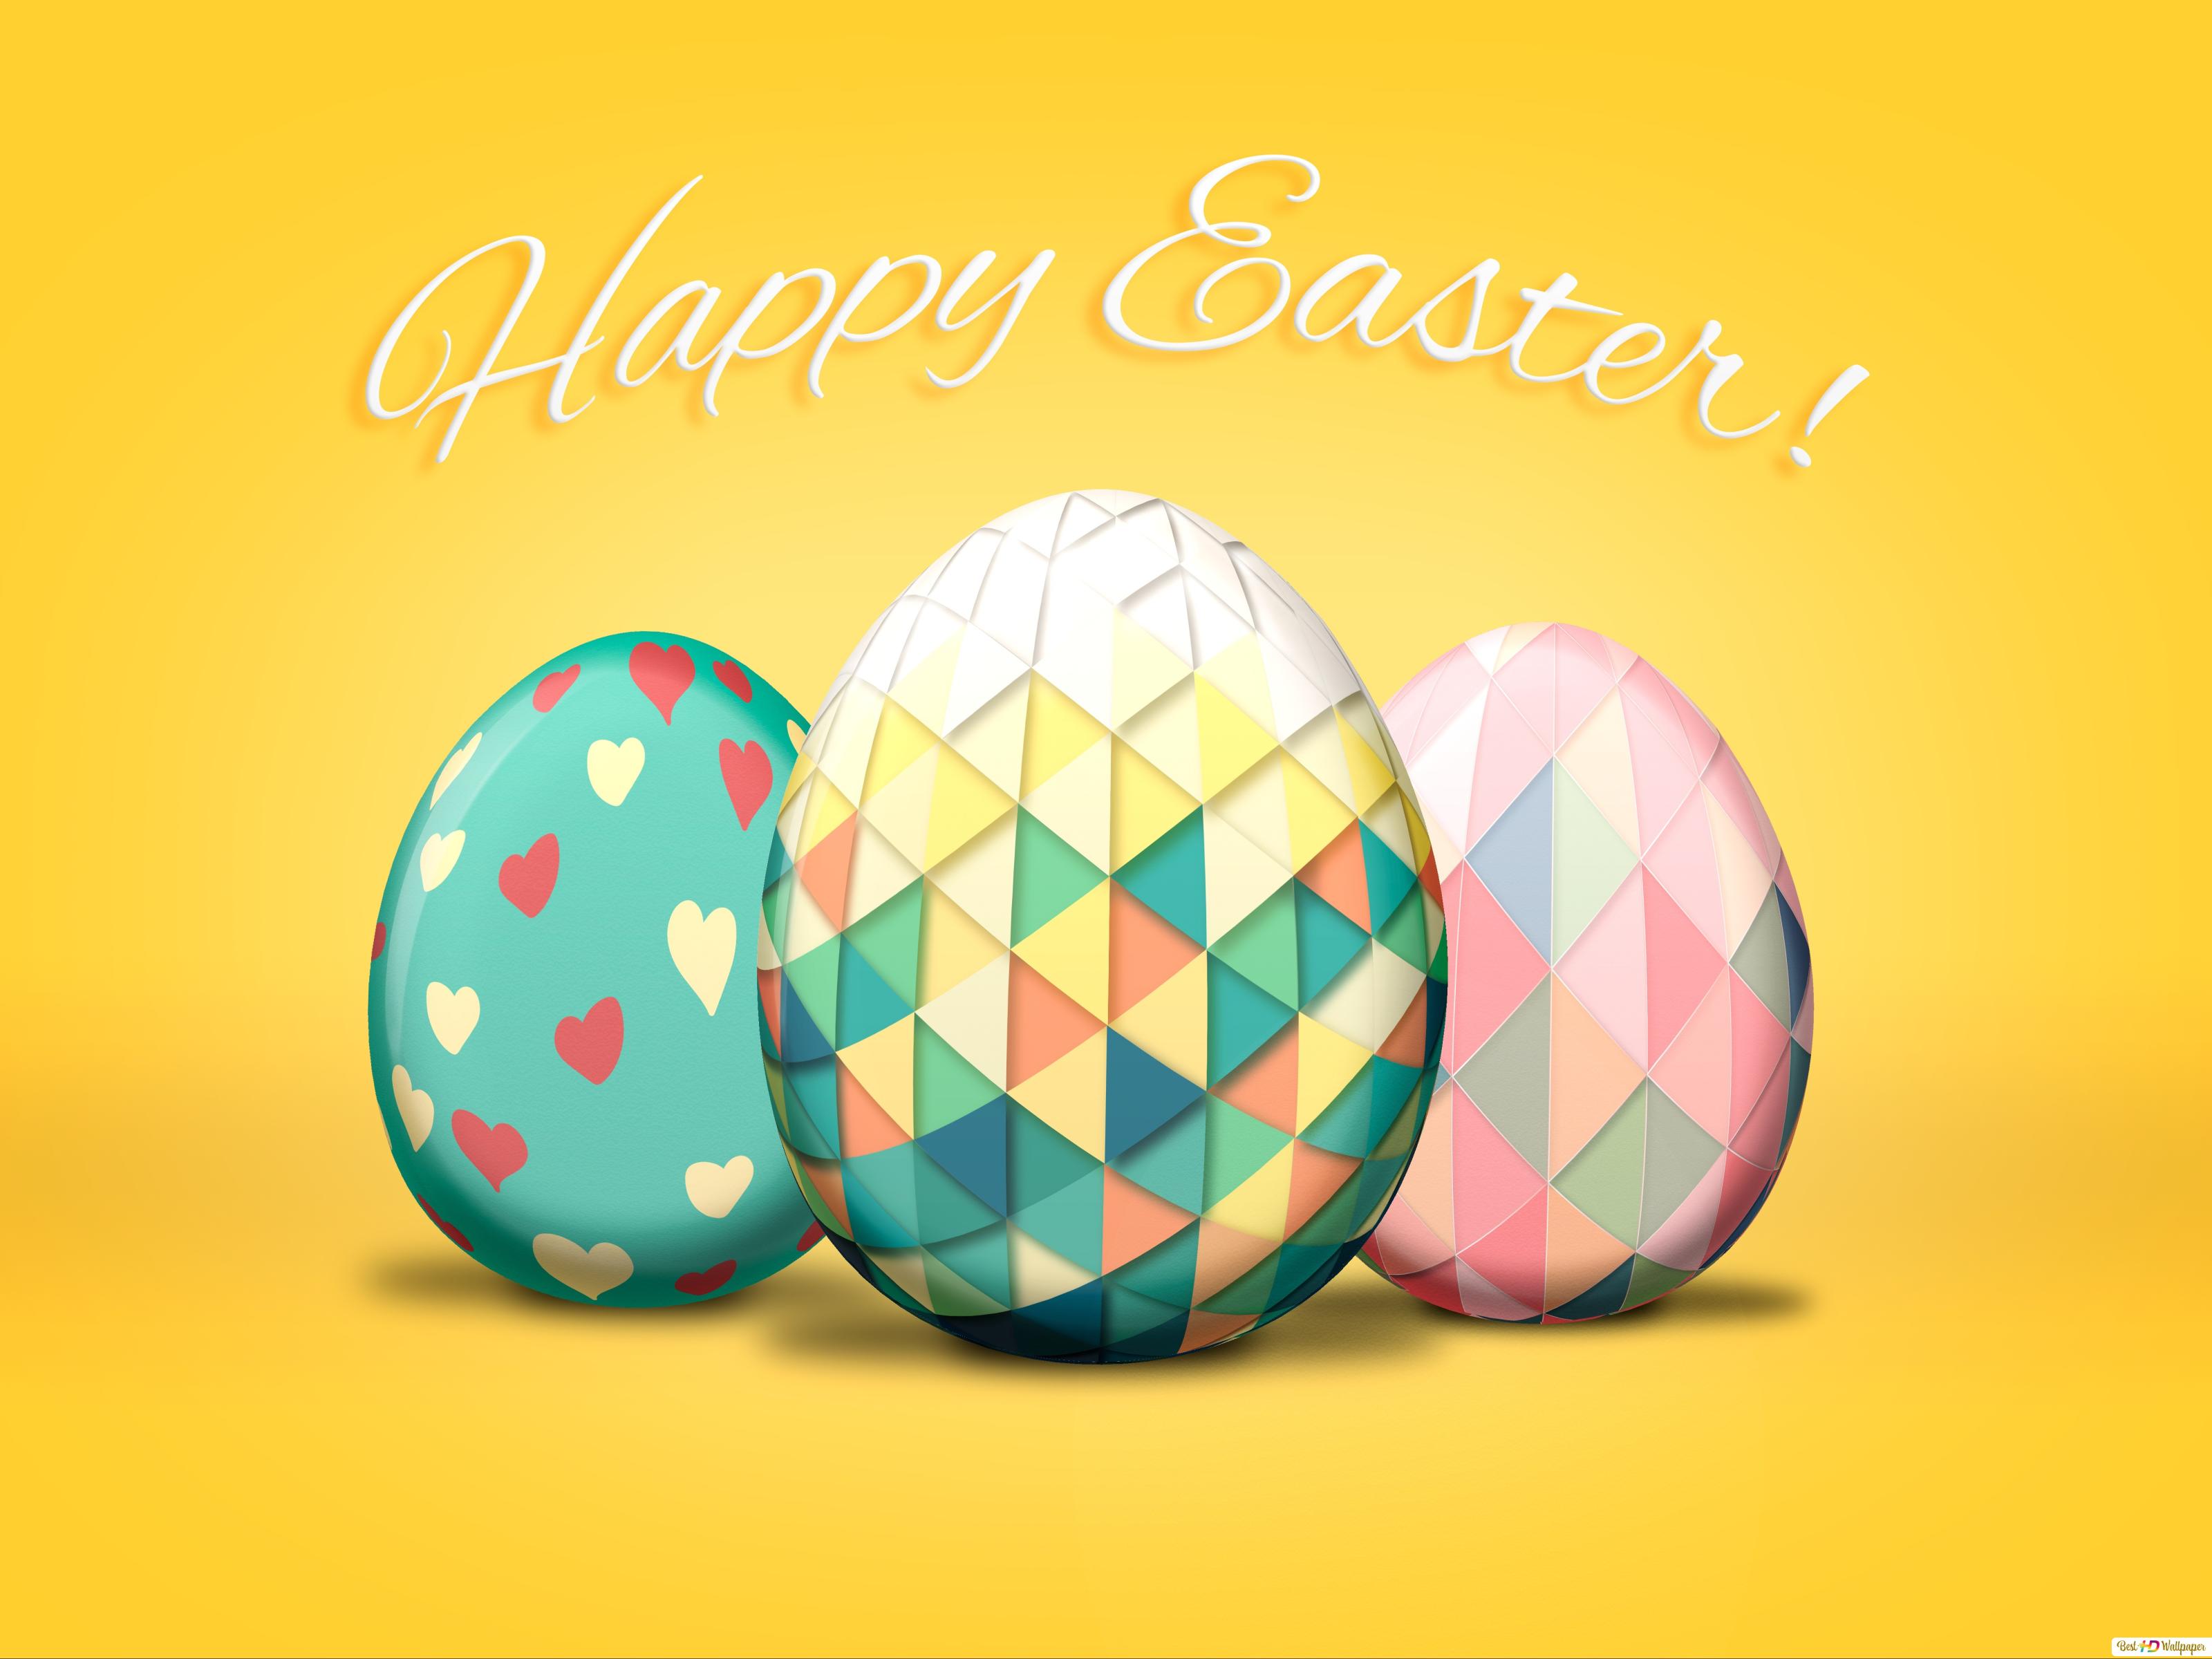 Happy Easter! greeting with artistic eggs and yellow background HD wallpaper download